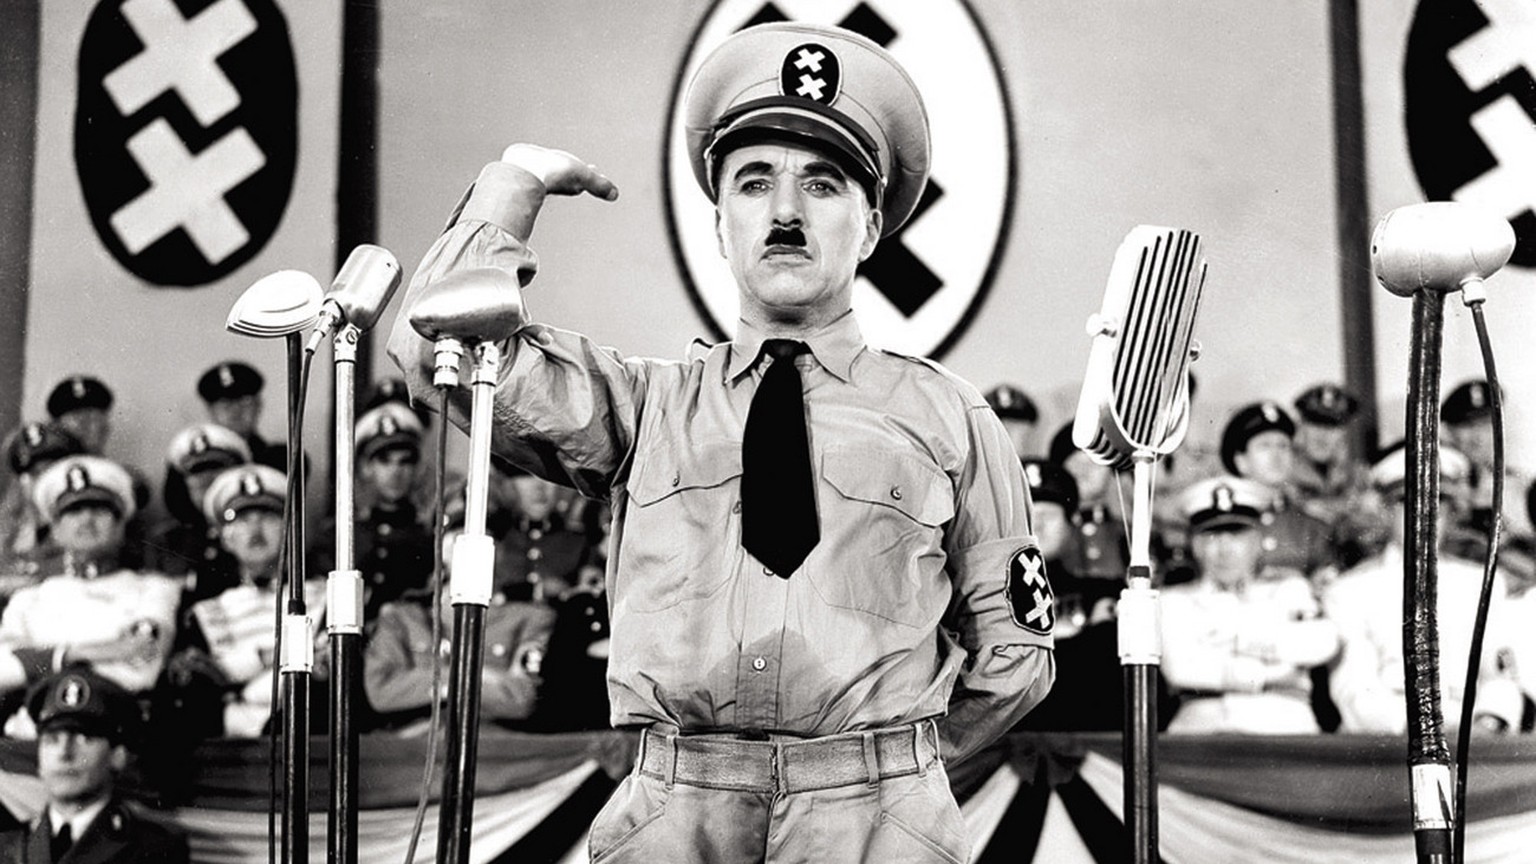 Legendary silent film actor/director Charlie Chaplin is shown in a scene from the 1940 film &quot;The Great Dictator,&quot; his first film with dialogue, in this promotional photo. Chaplin plays the d ...